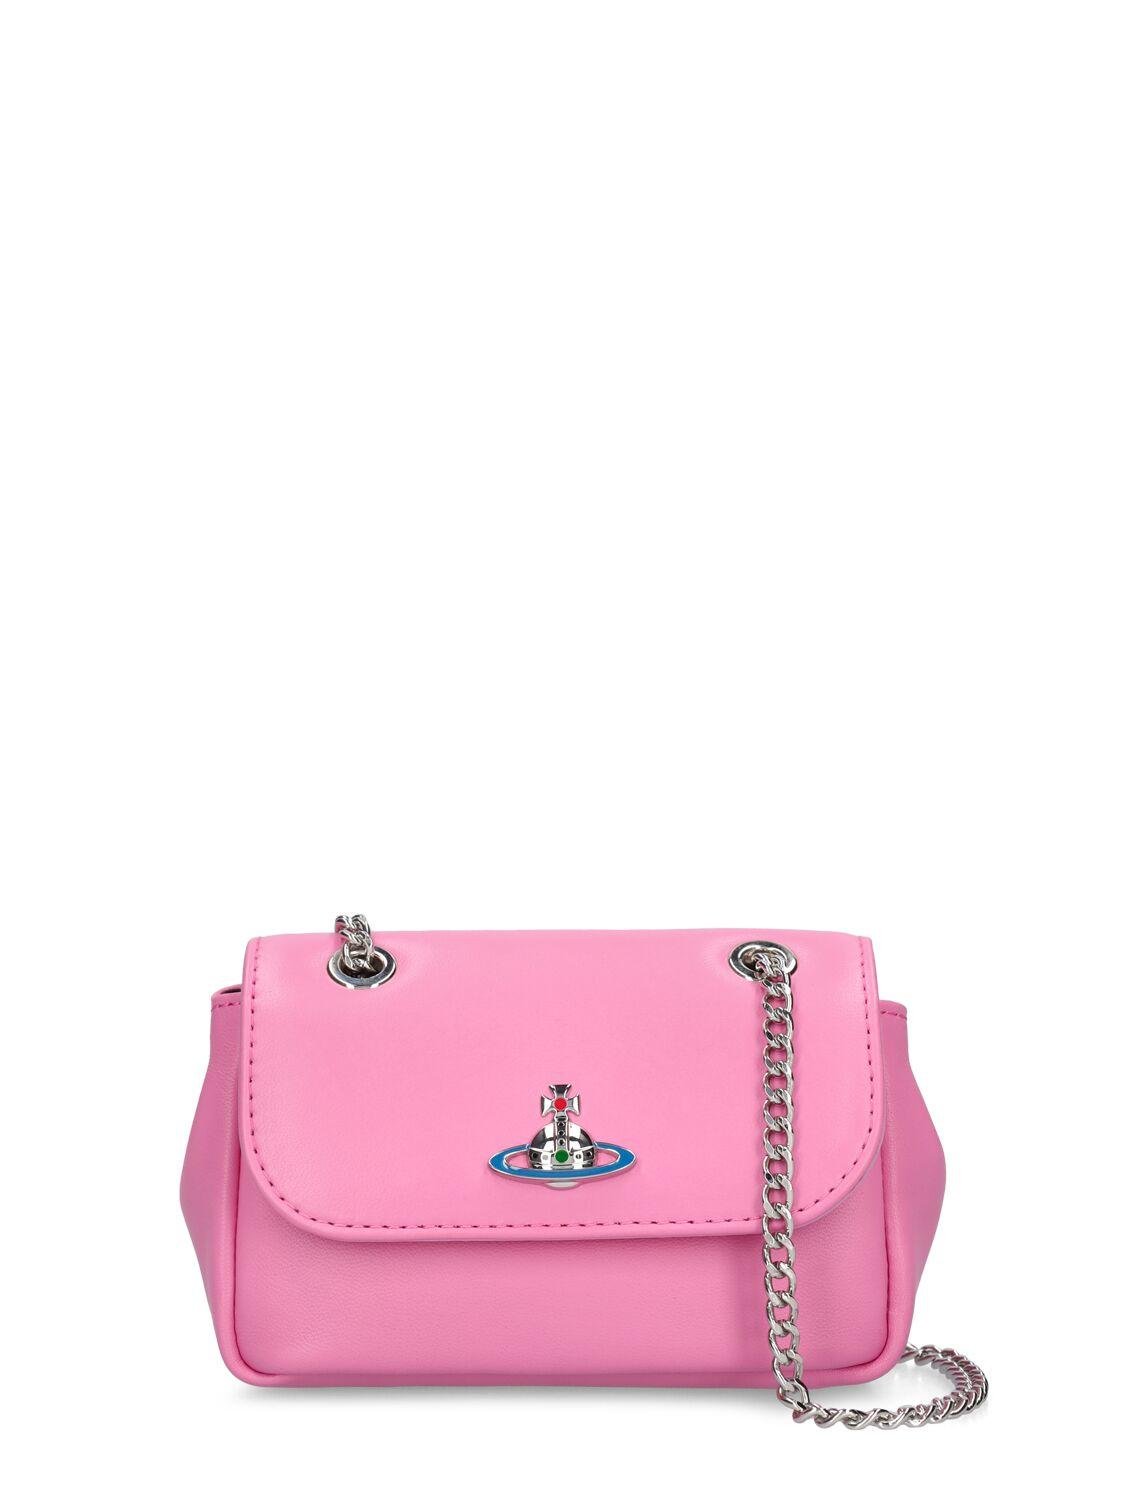 Small Leather Shoulder Bag W/chain by VIVIENNE WESTWOOD